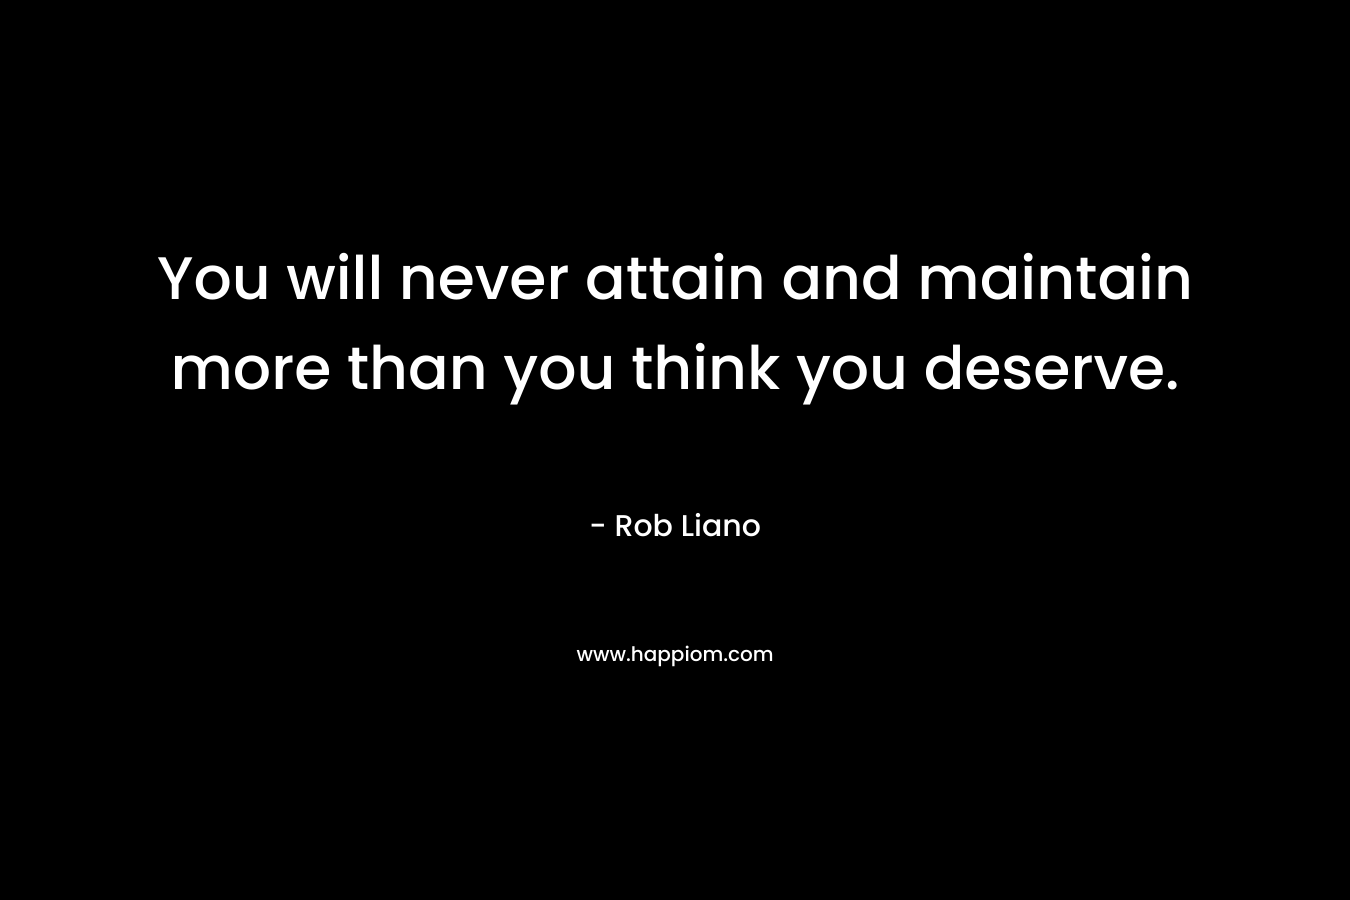 You will never attain and maintain more than you think you deserve.